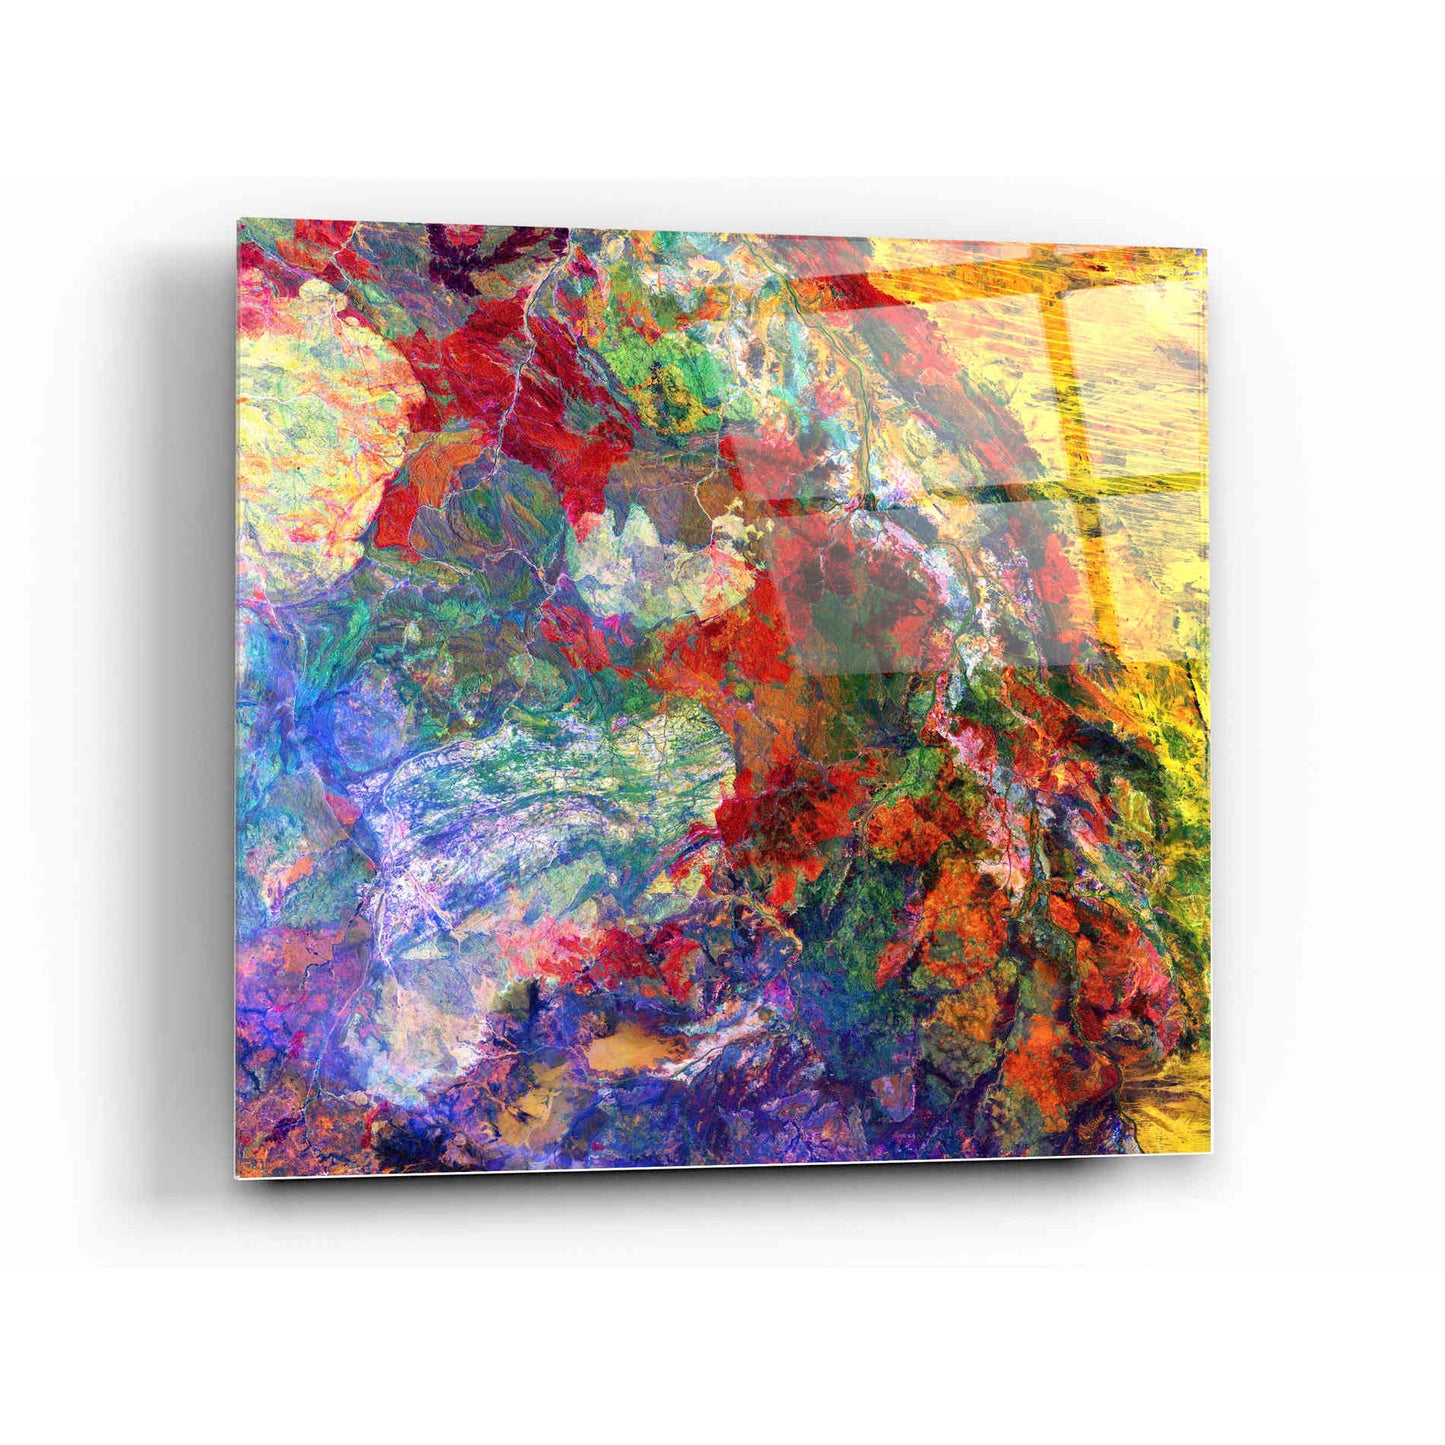 Epic Art 'Earth As Art: Melted Colors' Acrylic Glass Wall Art,12x12